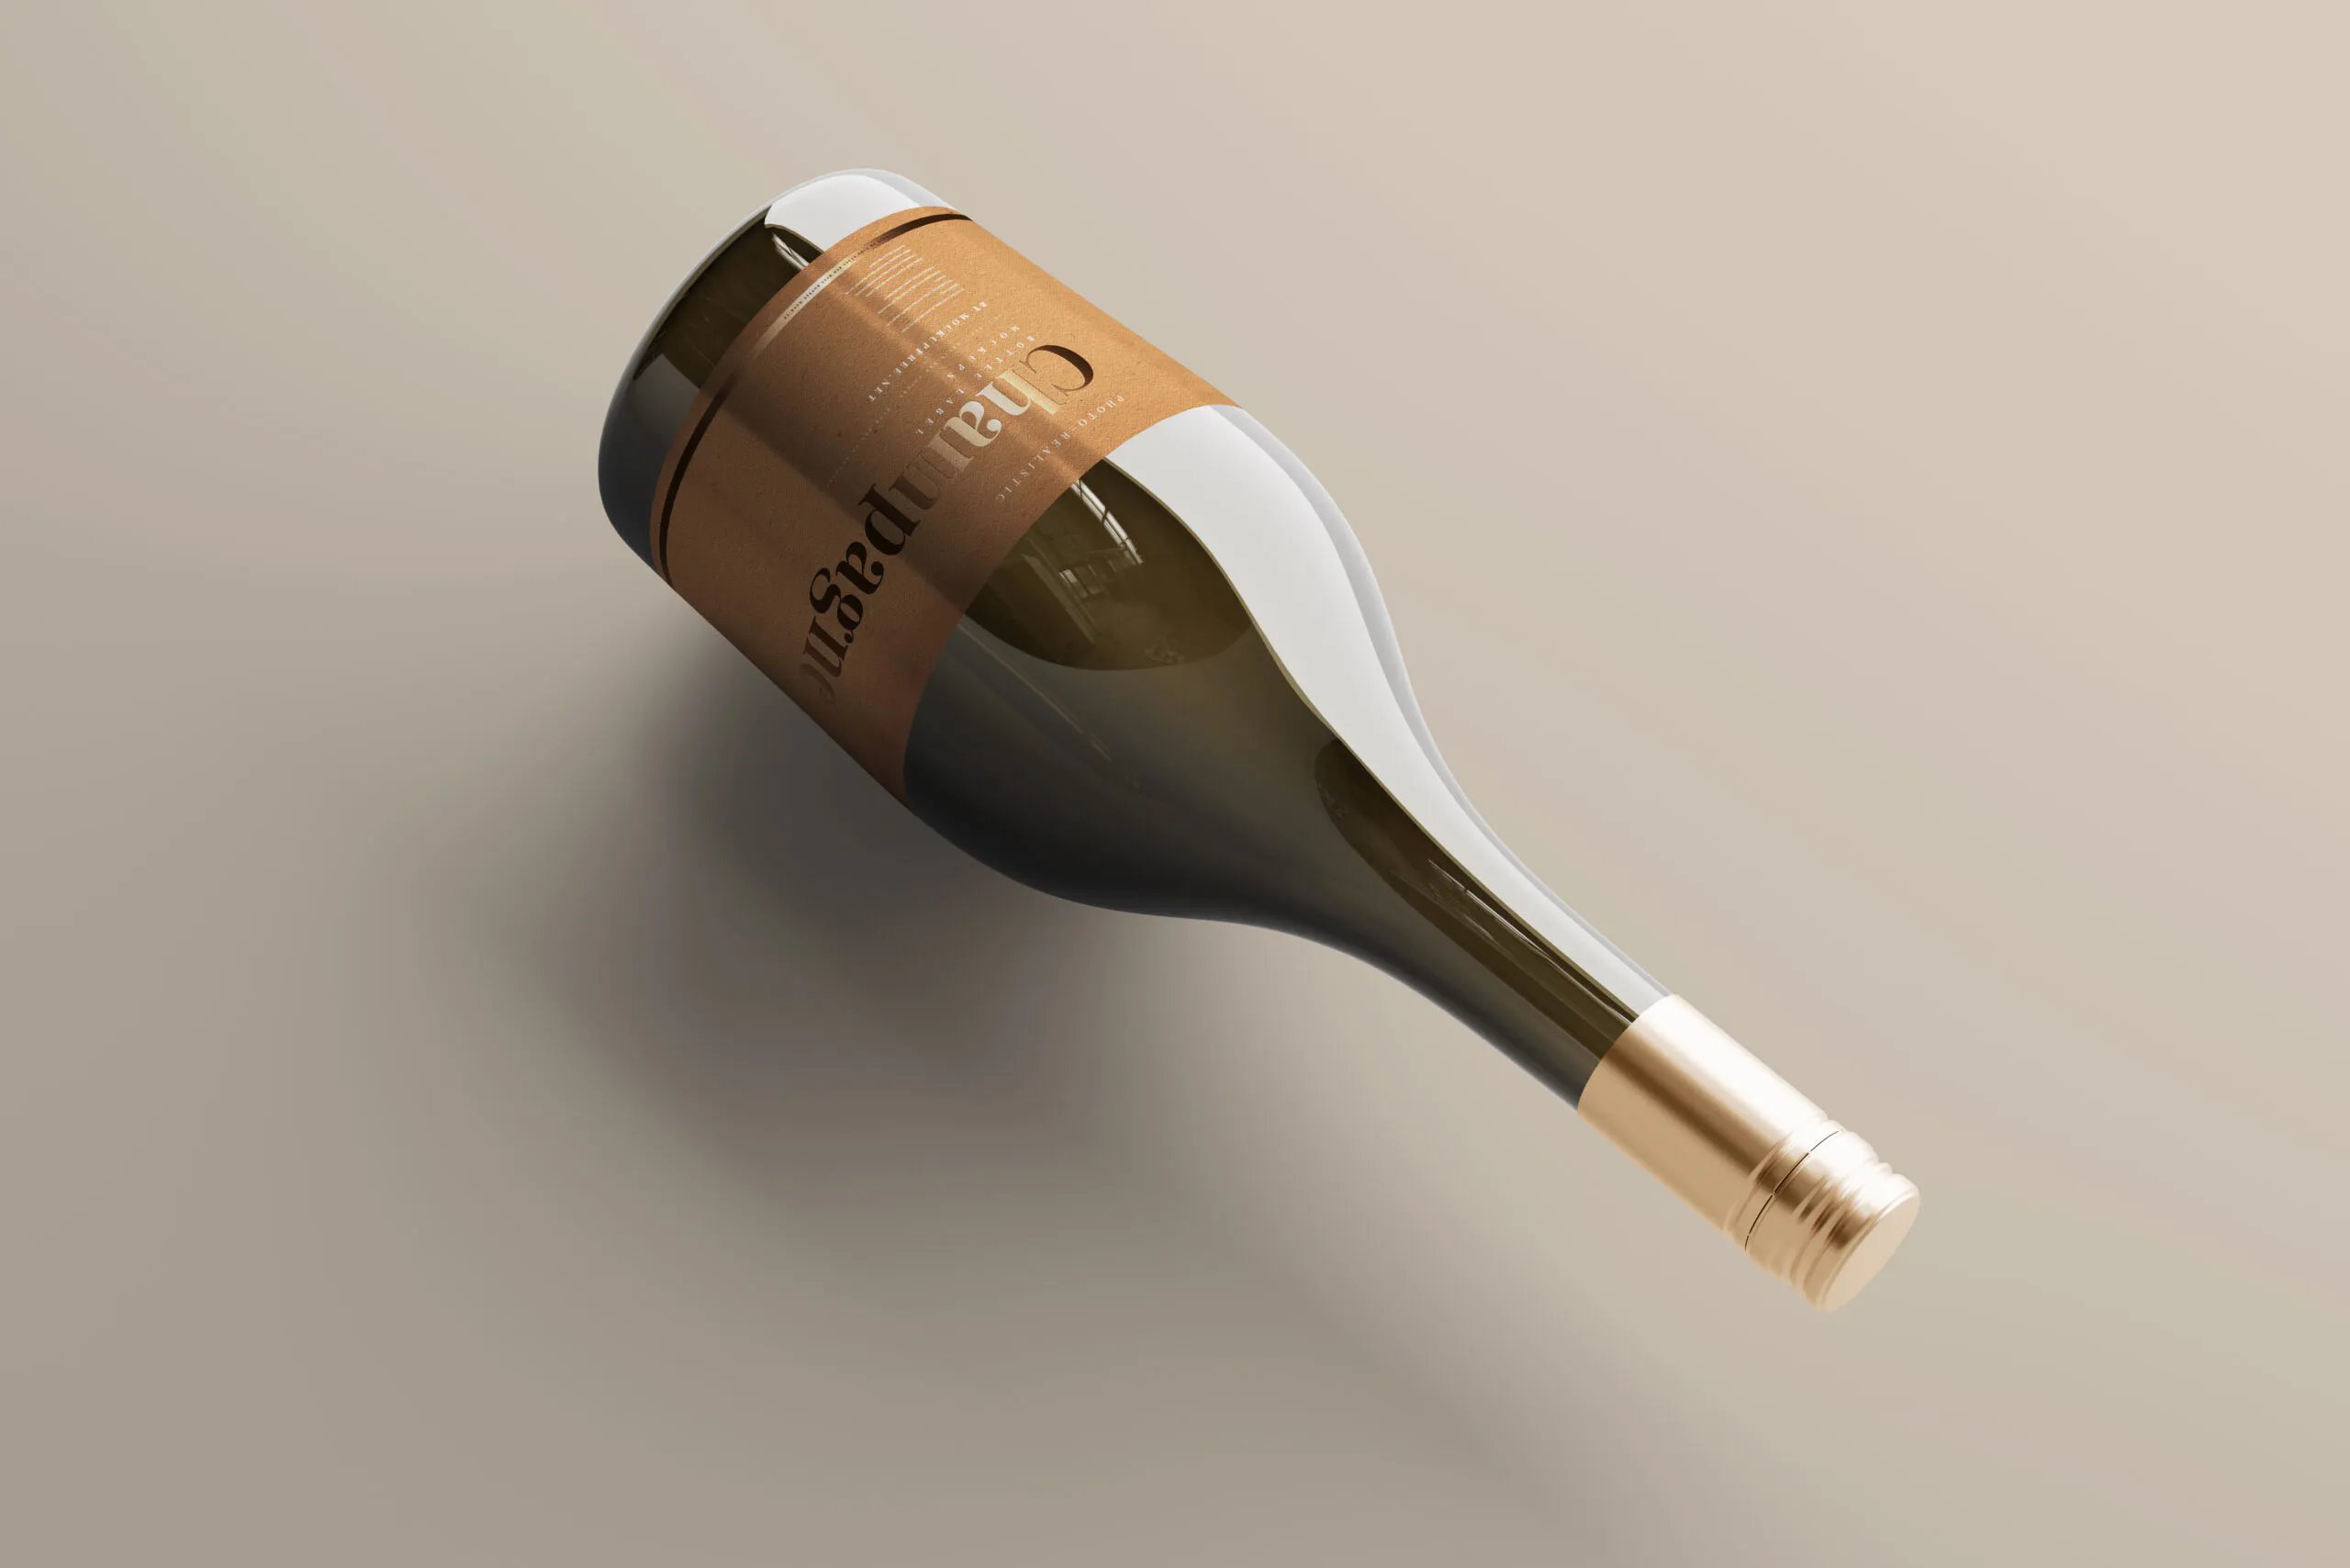 Varied Views of 5 Champagne Bottle Mockups FREE PSD